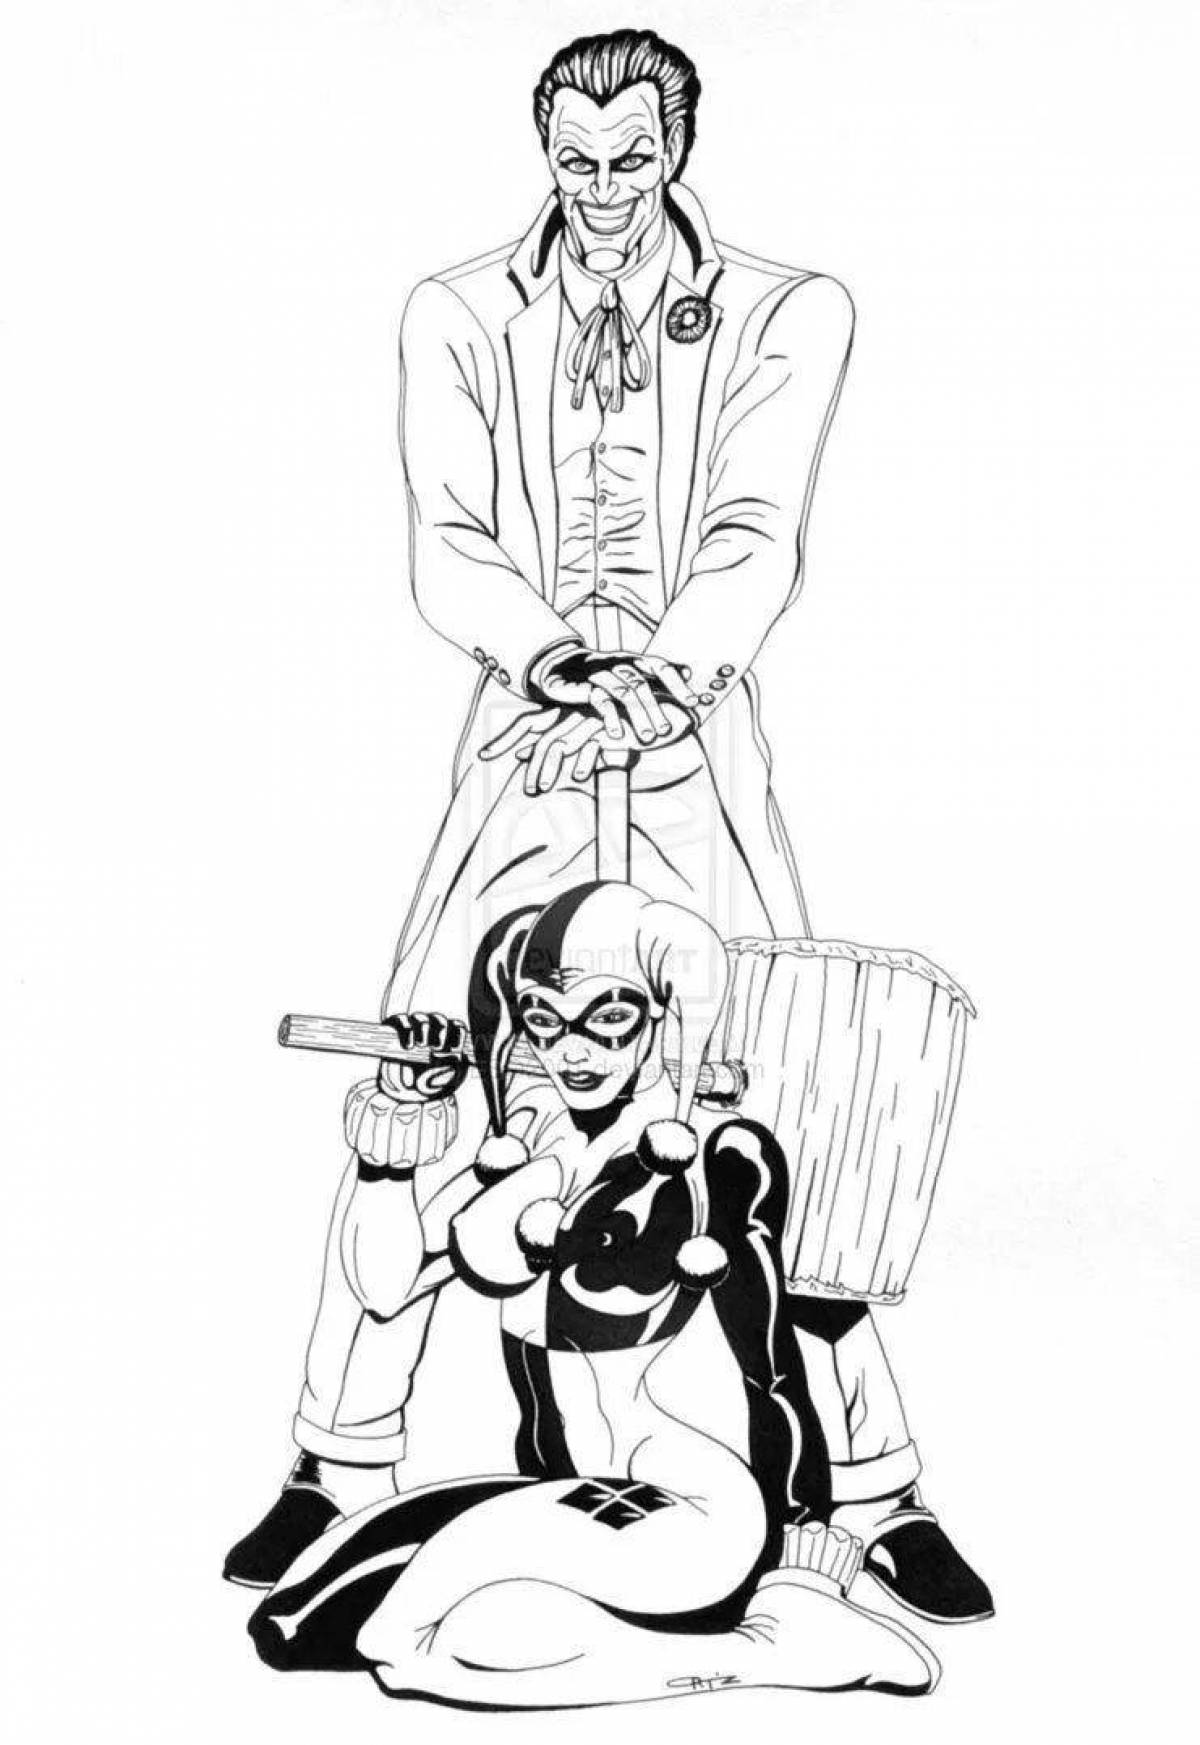 Coloring book dazzling joker and harley quinn